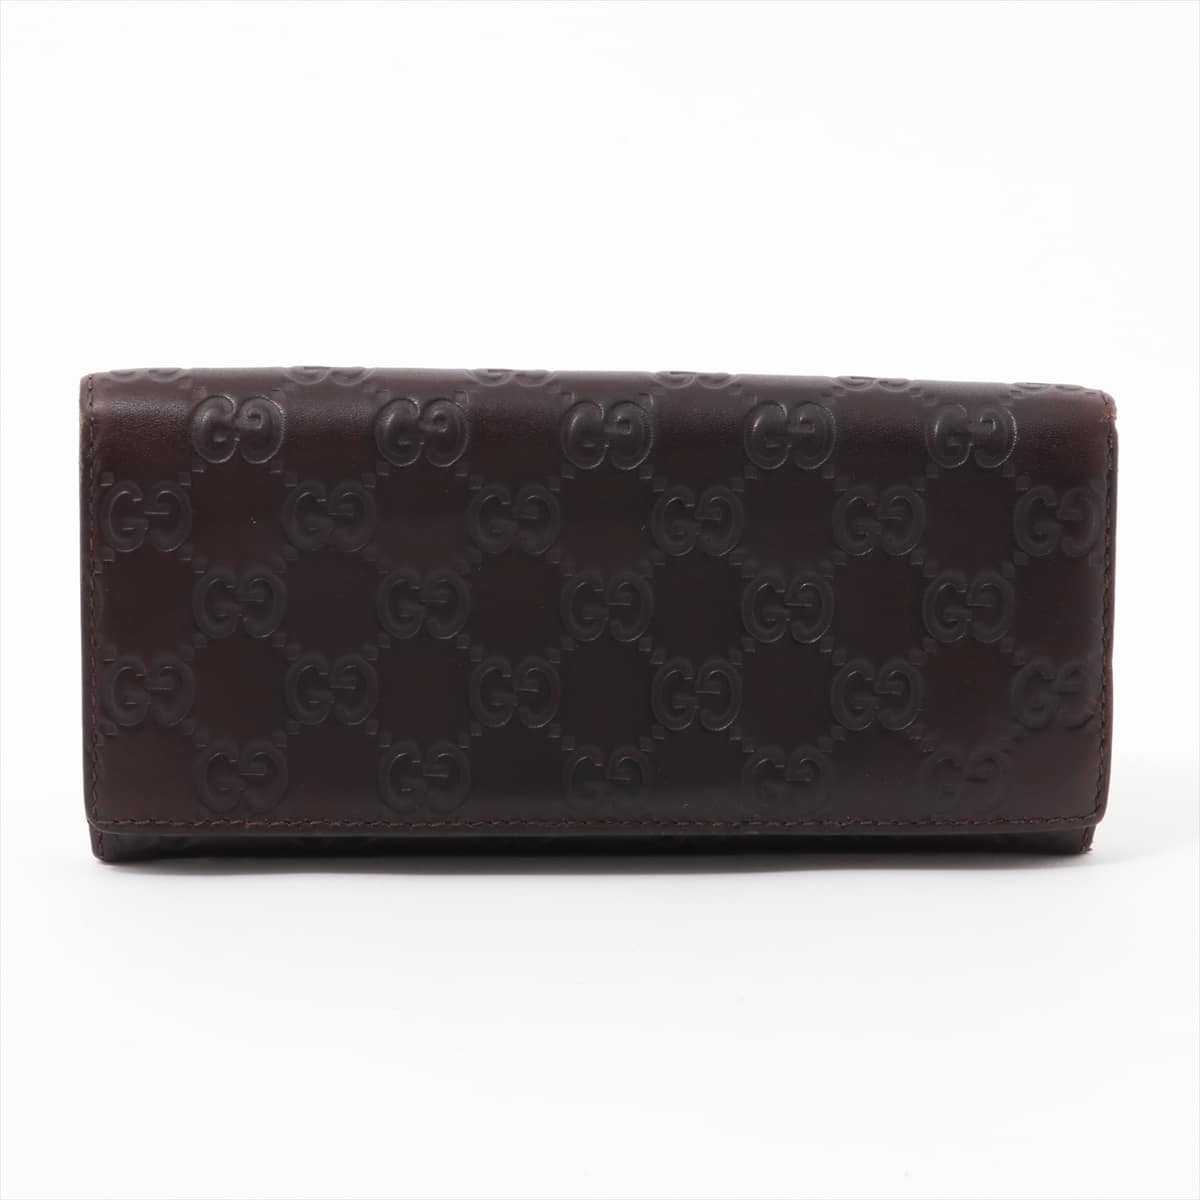 Gucci Guccissima 233154 Leather Wallet Brown